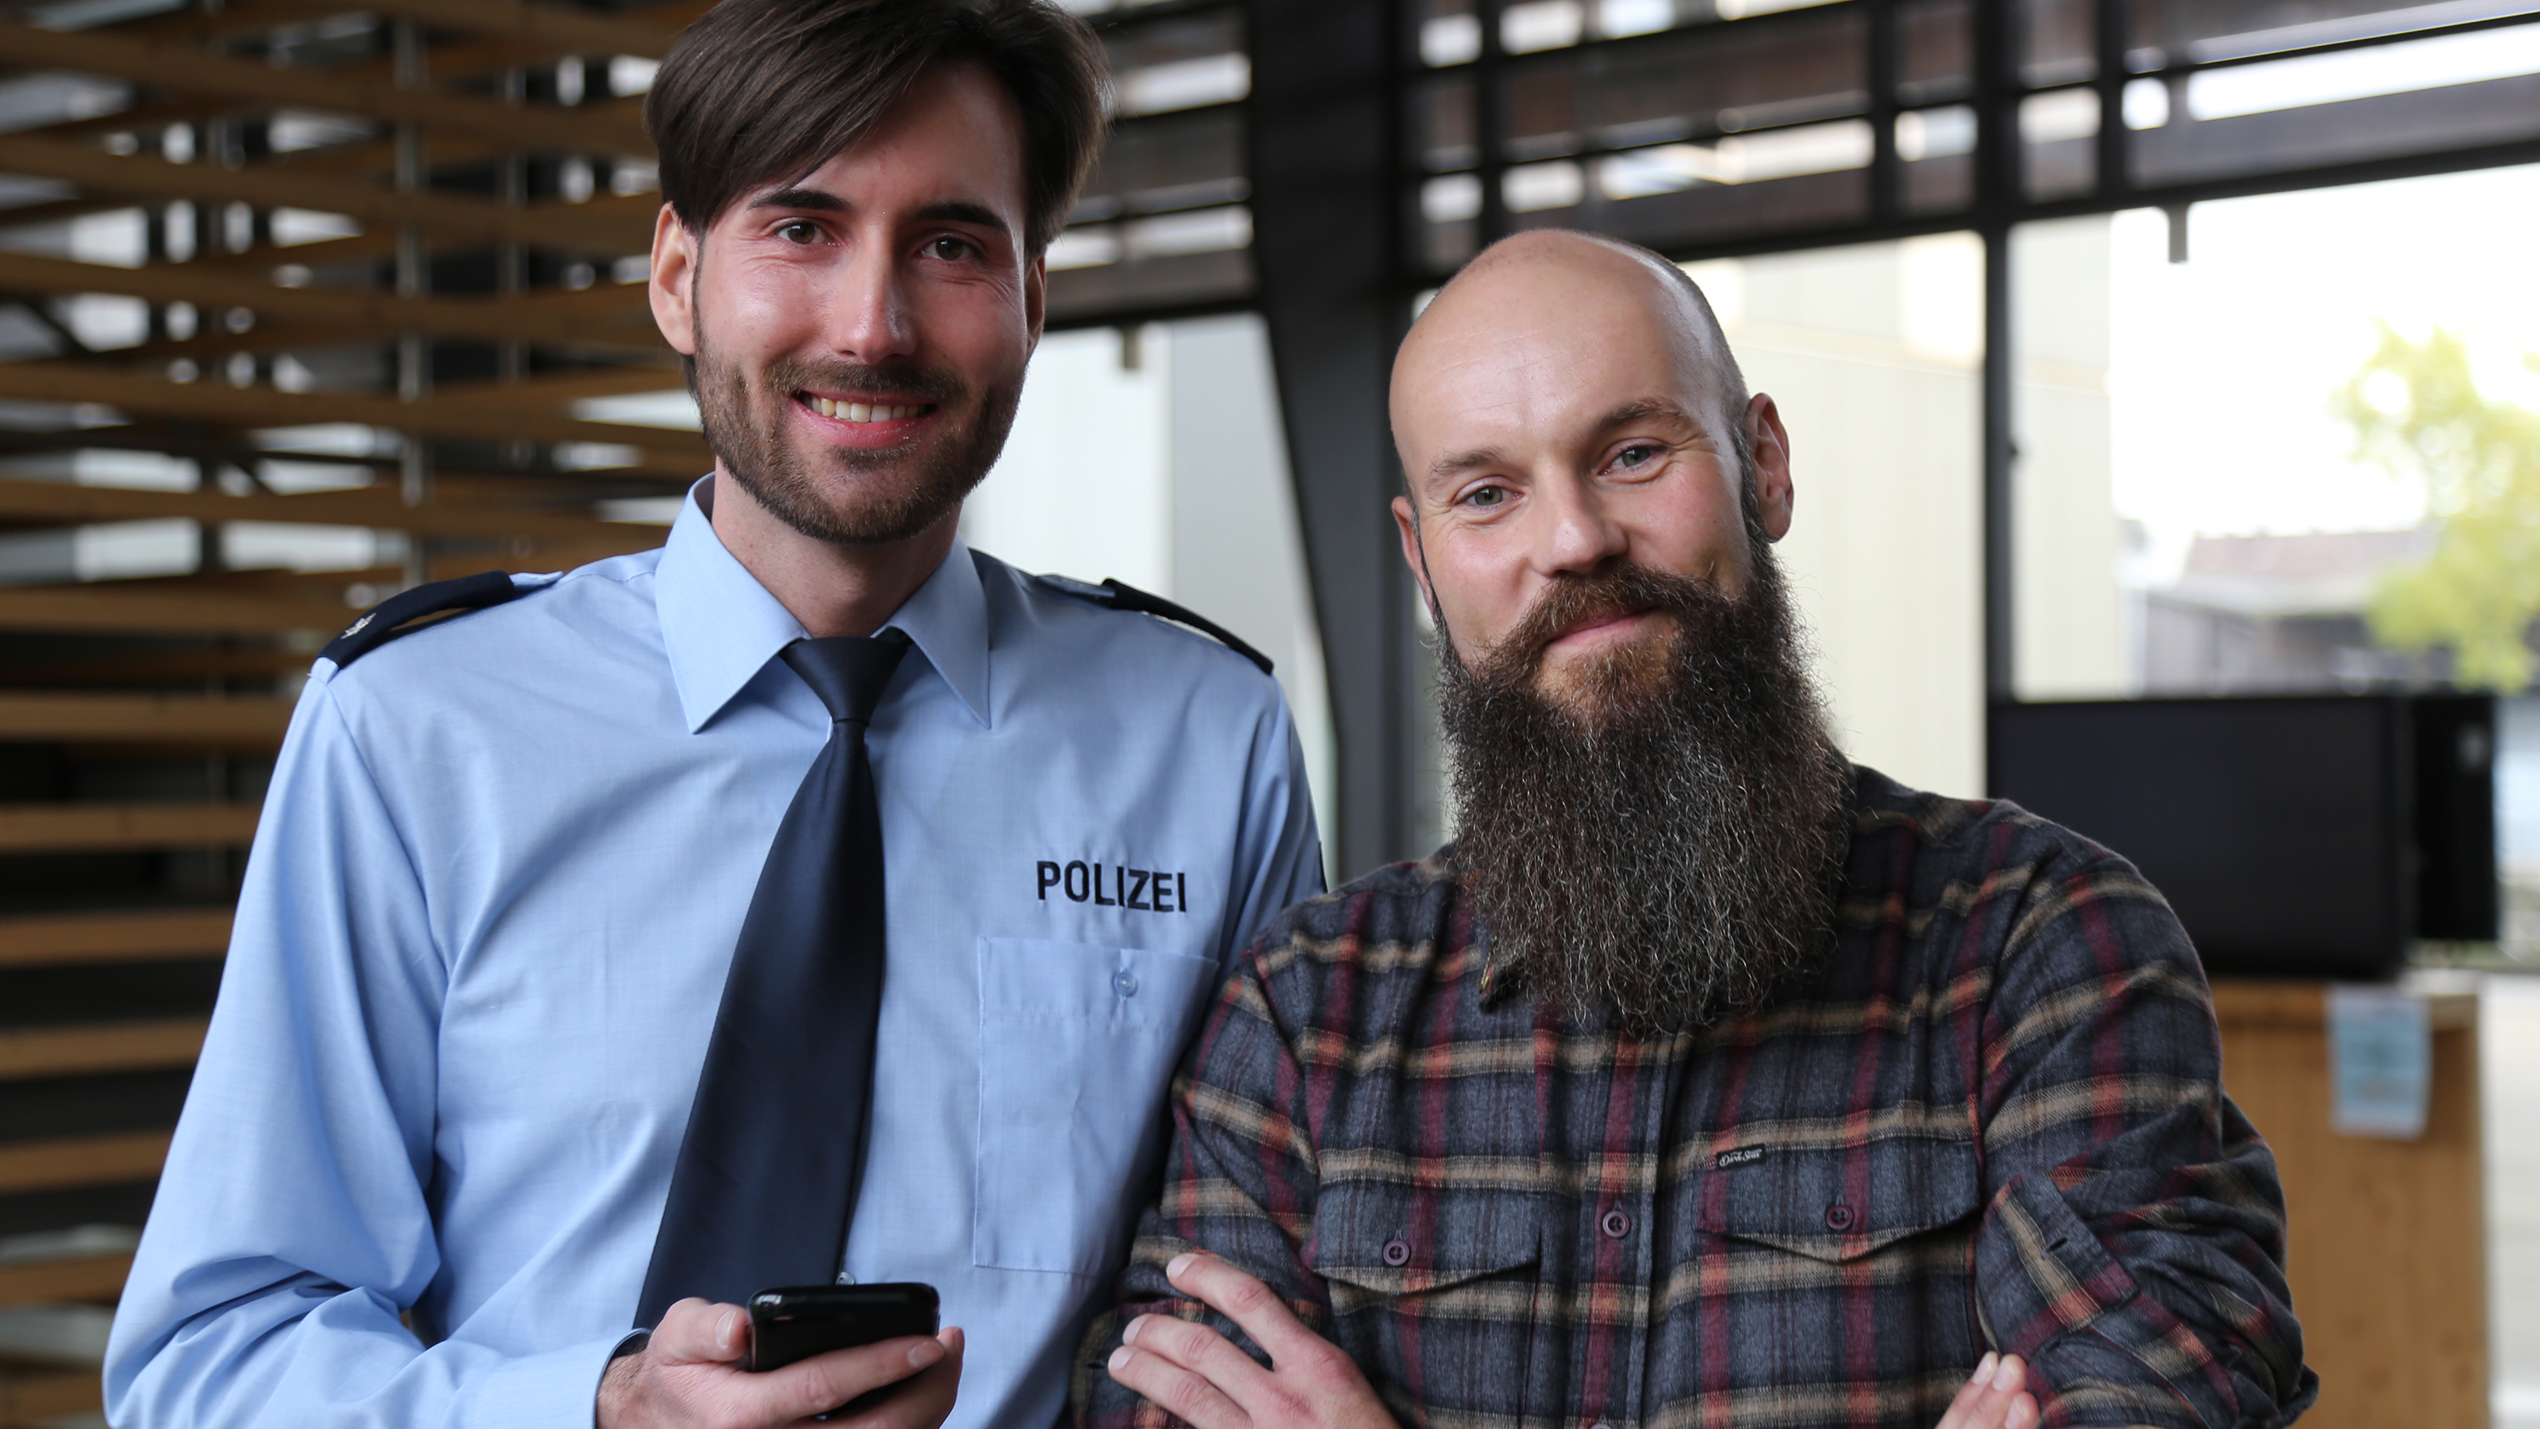 Policeman and IT expert at the LZPD NRW